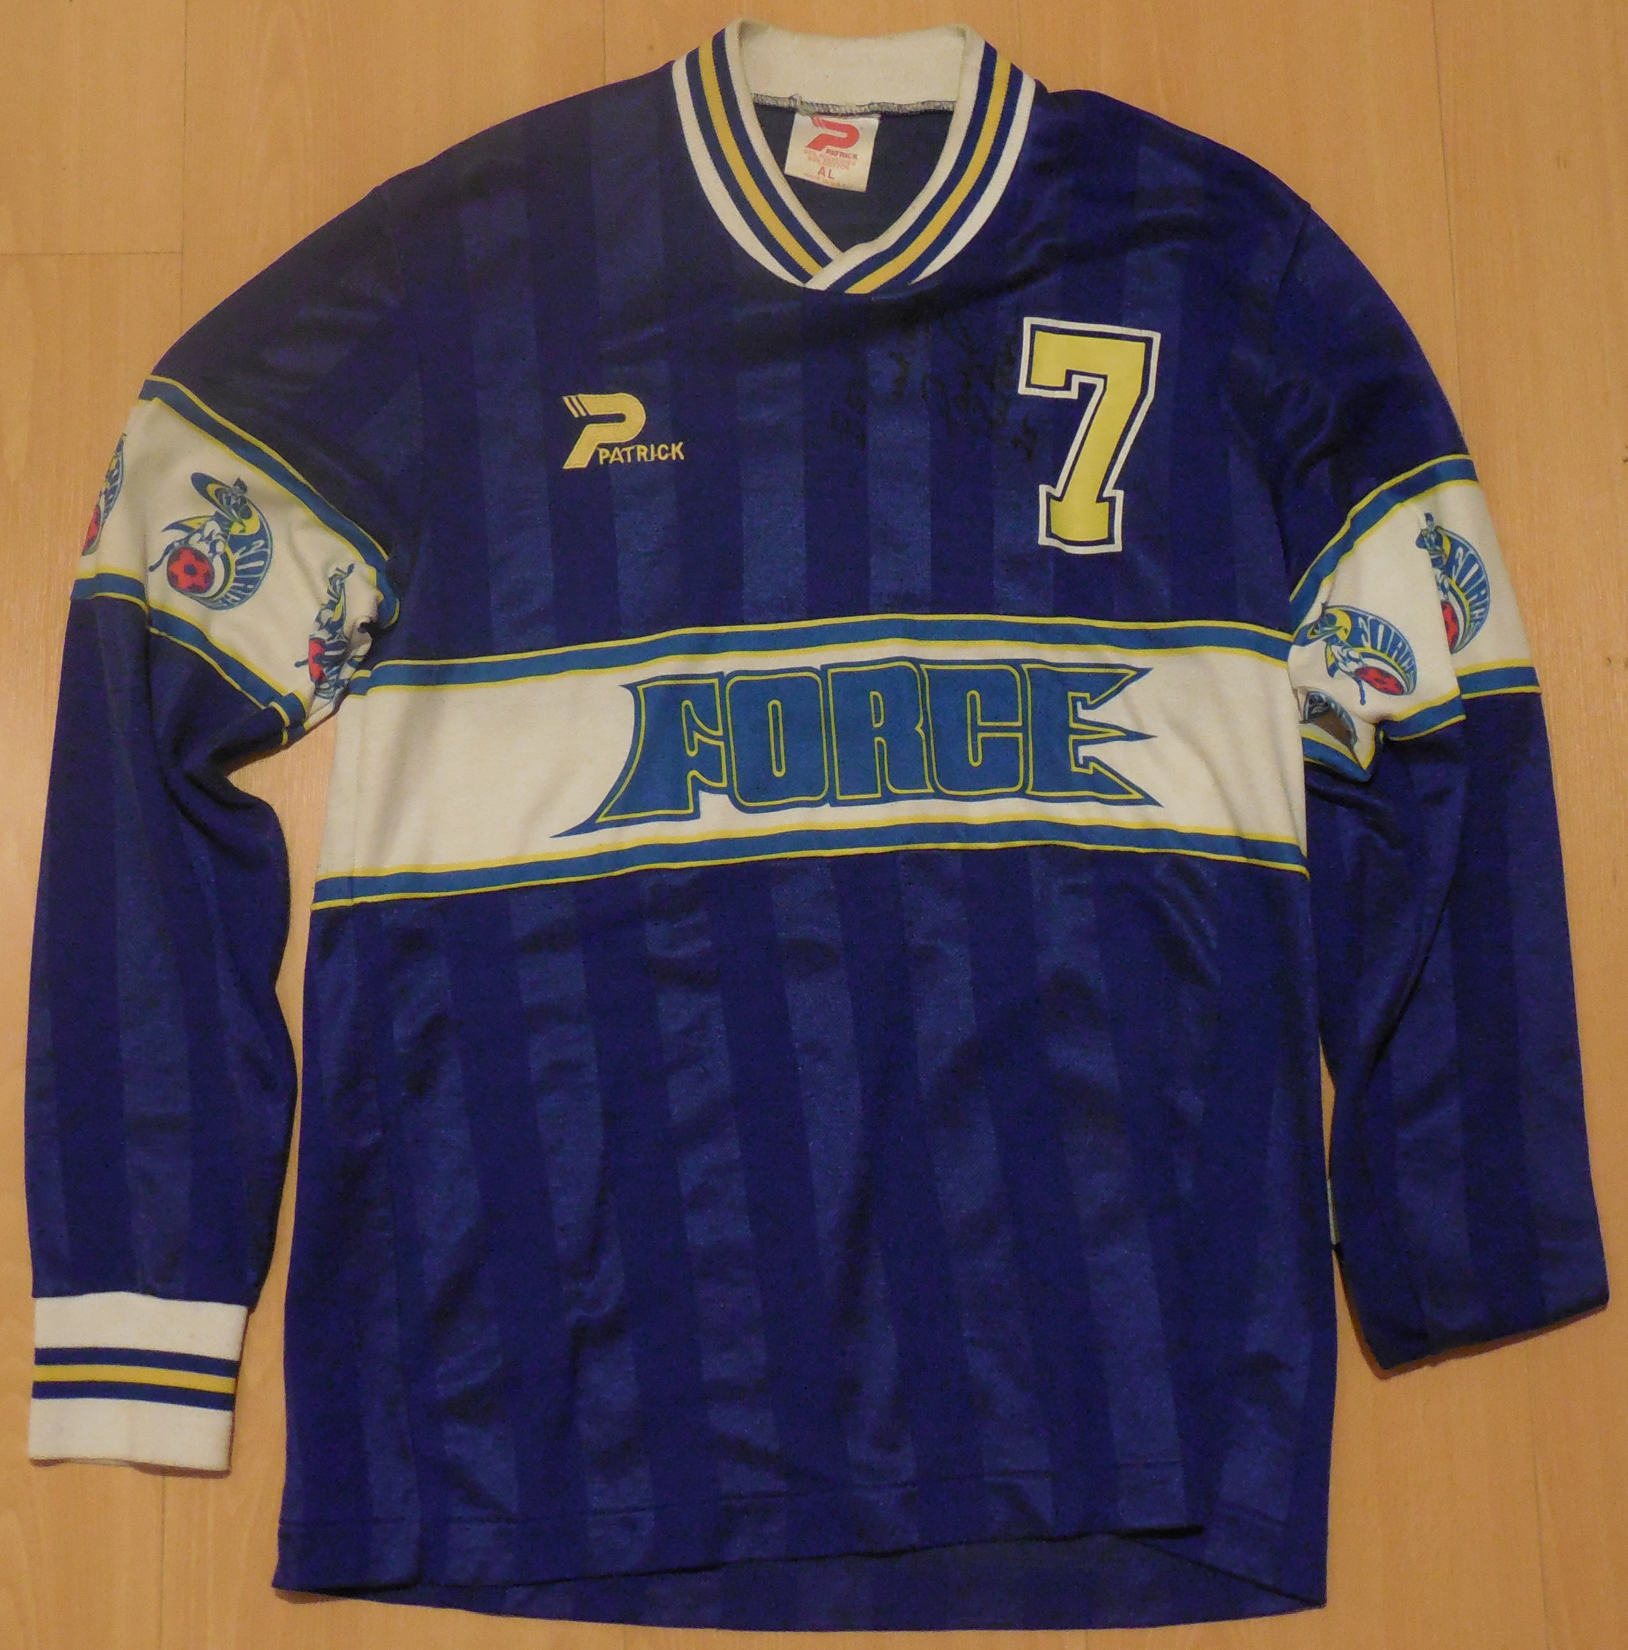 cleveland force jersey